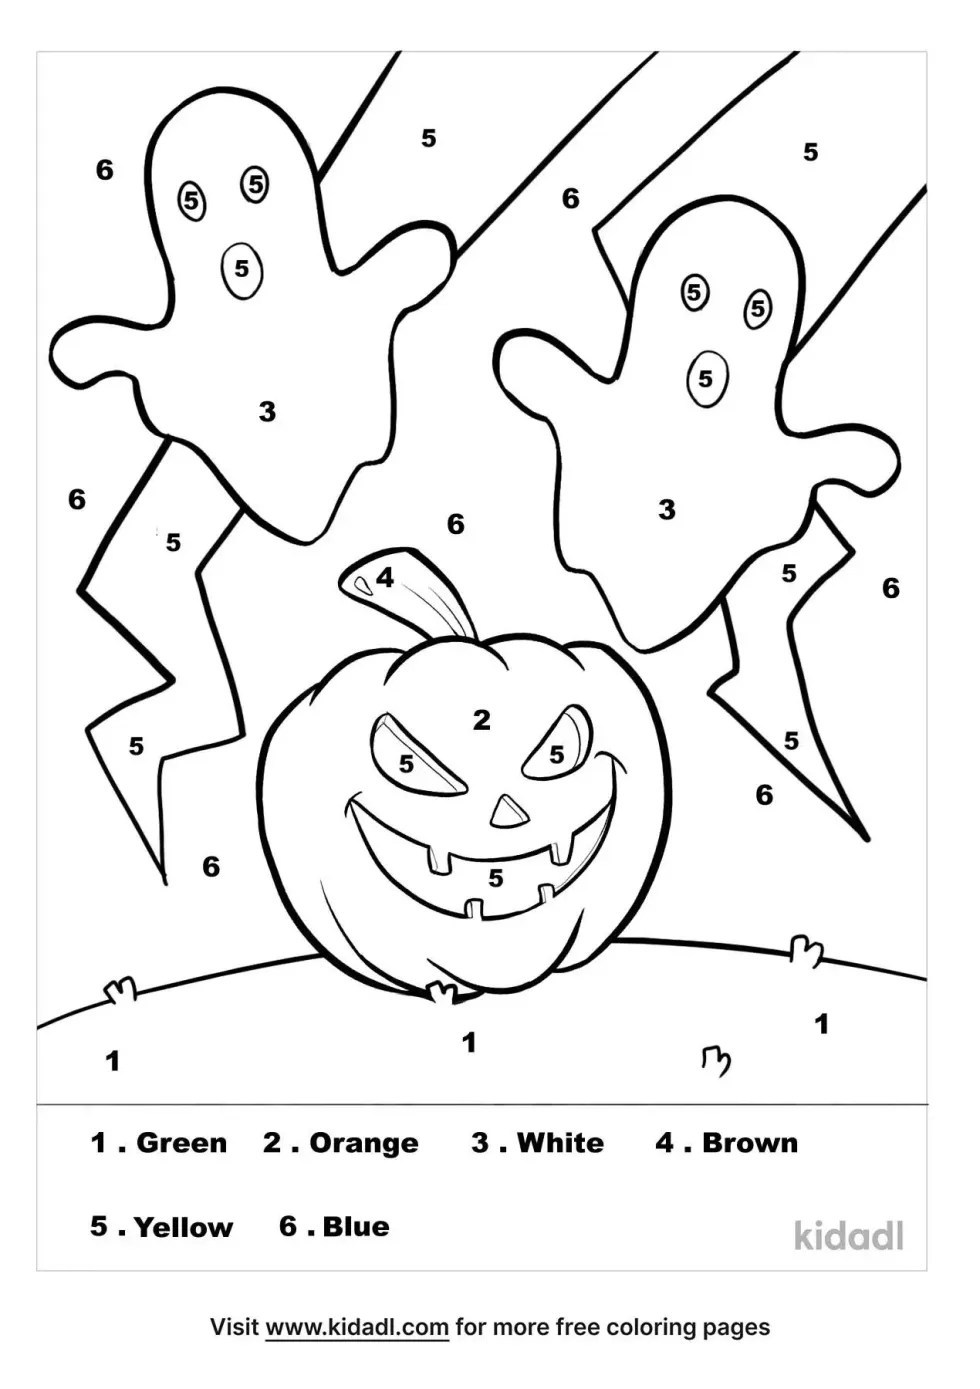 Halloween Color By Number